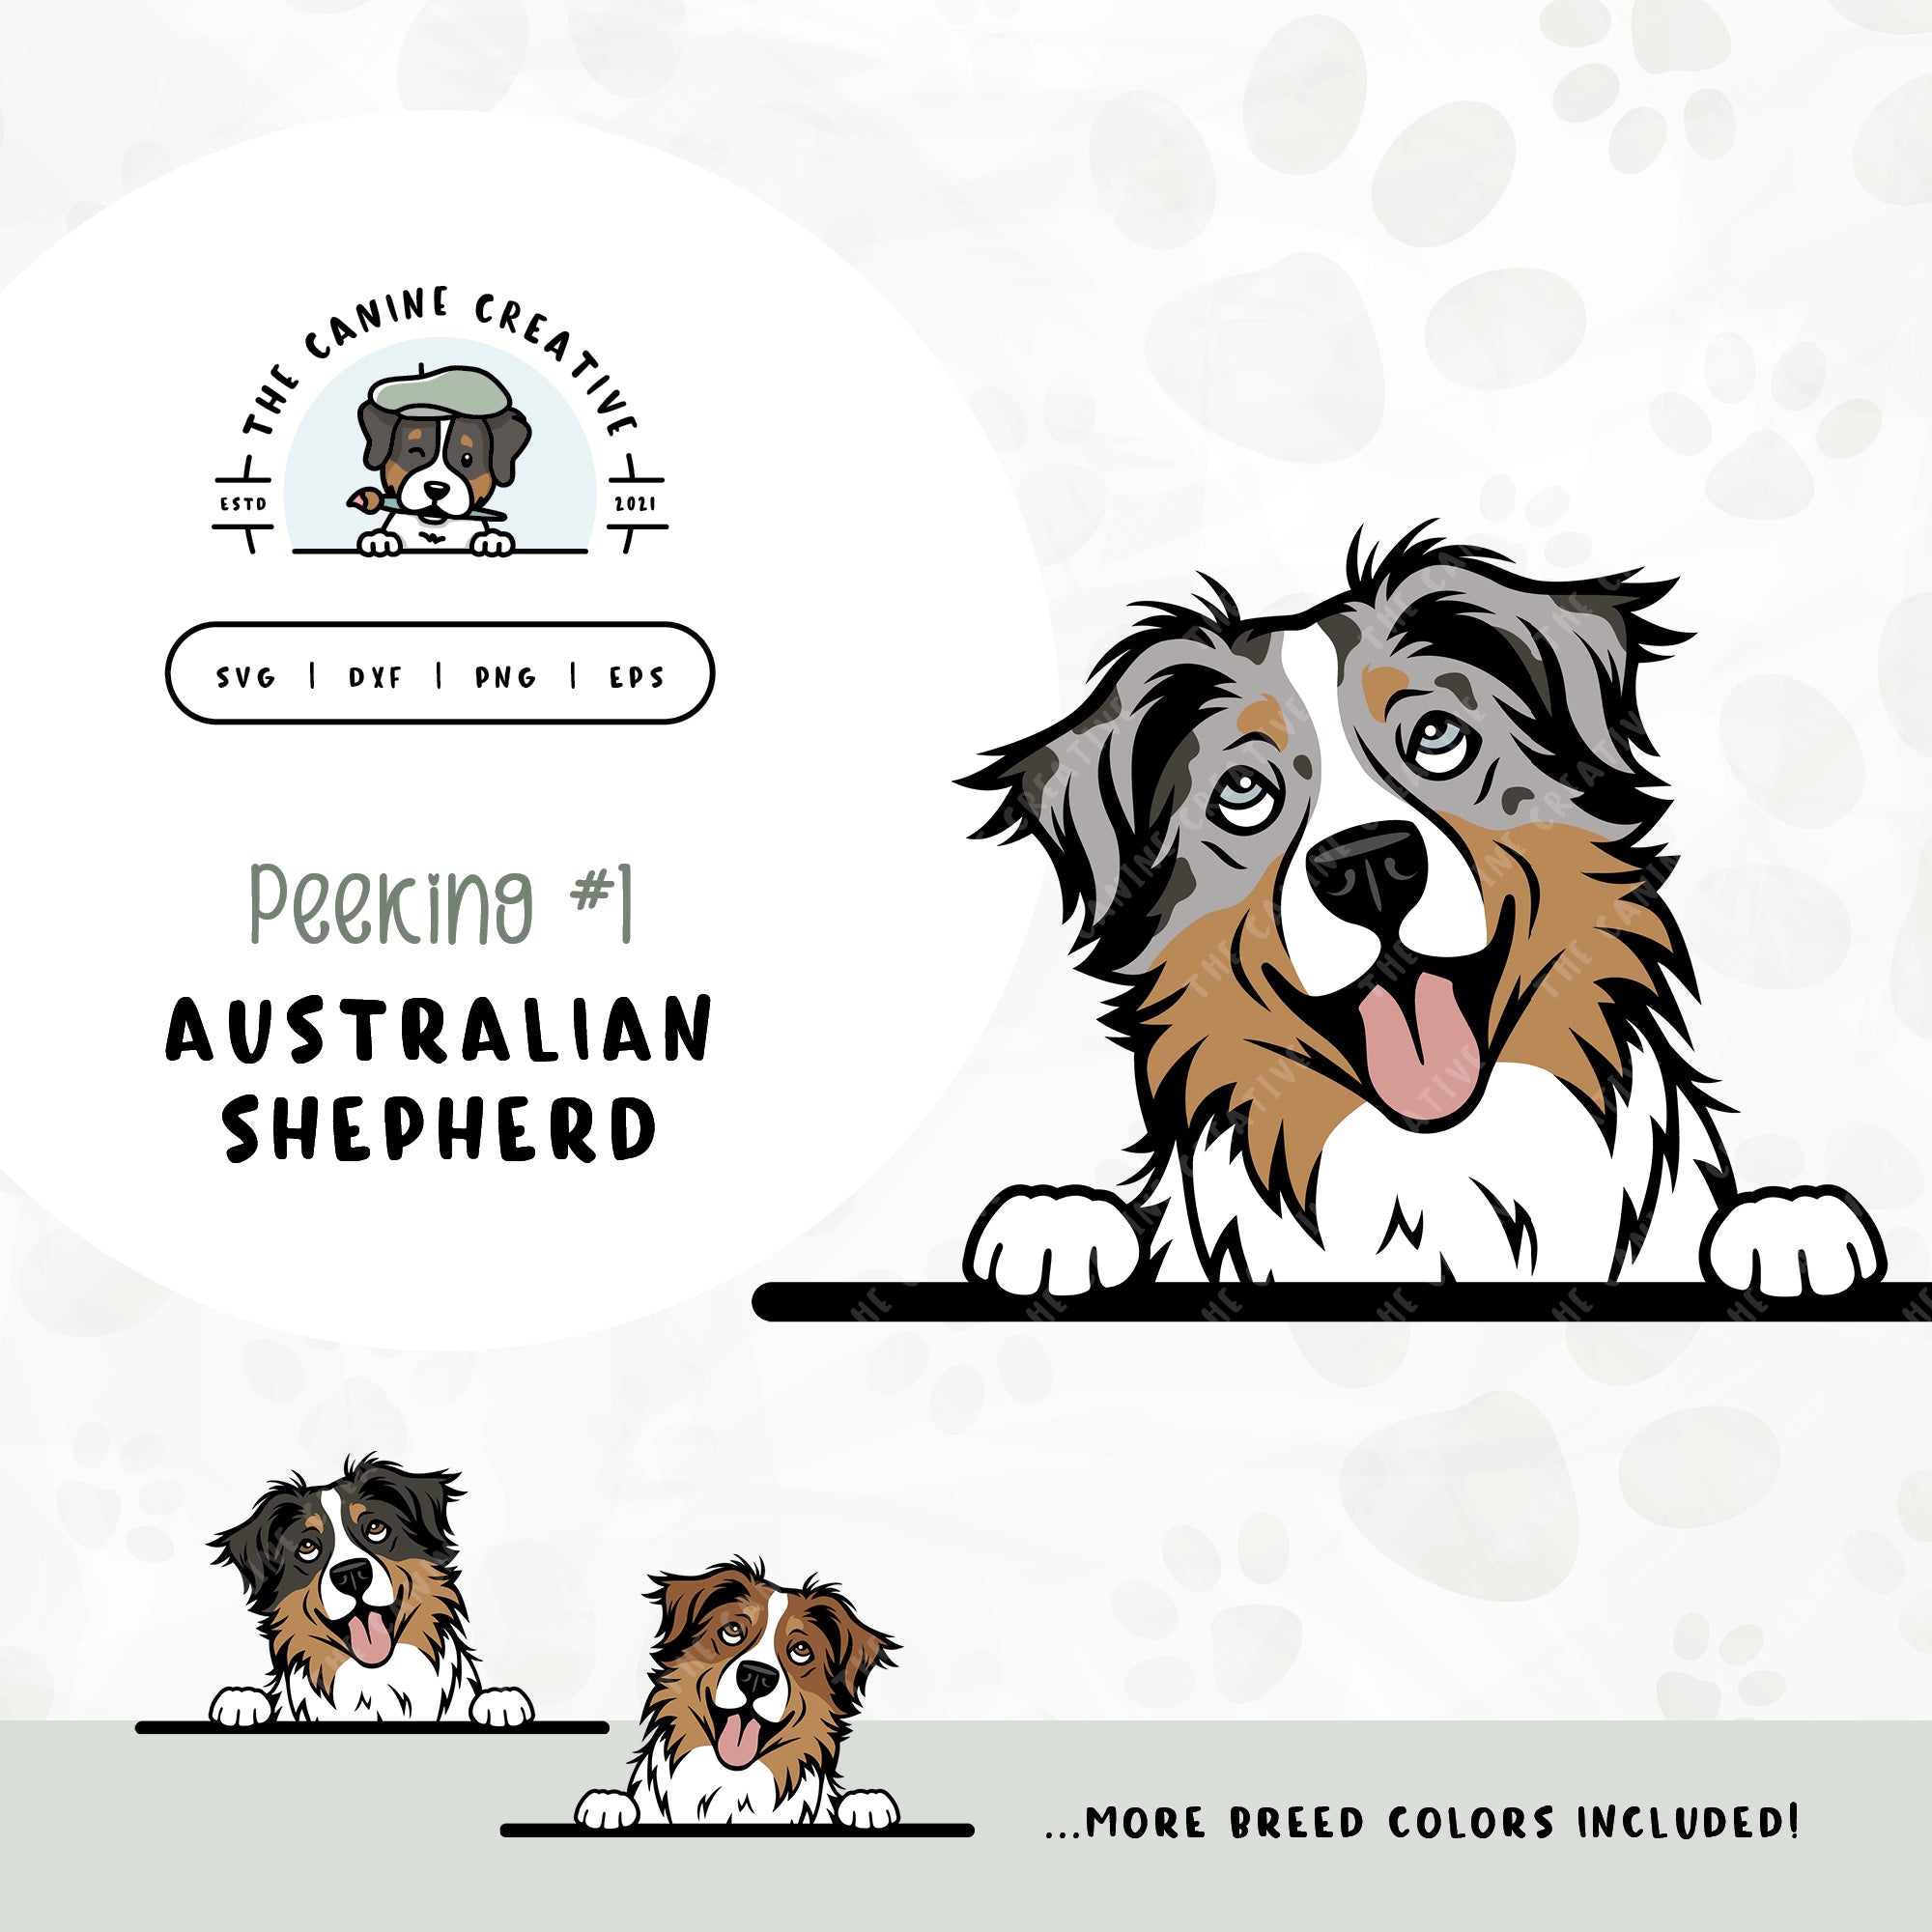 This illustrated design features a peeking Australian Shepherd. File formats include: SVG, DXF, PNG, and EPS.